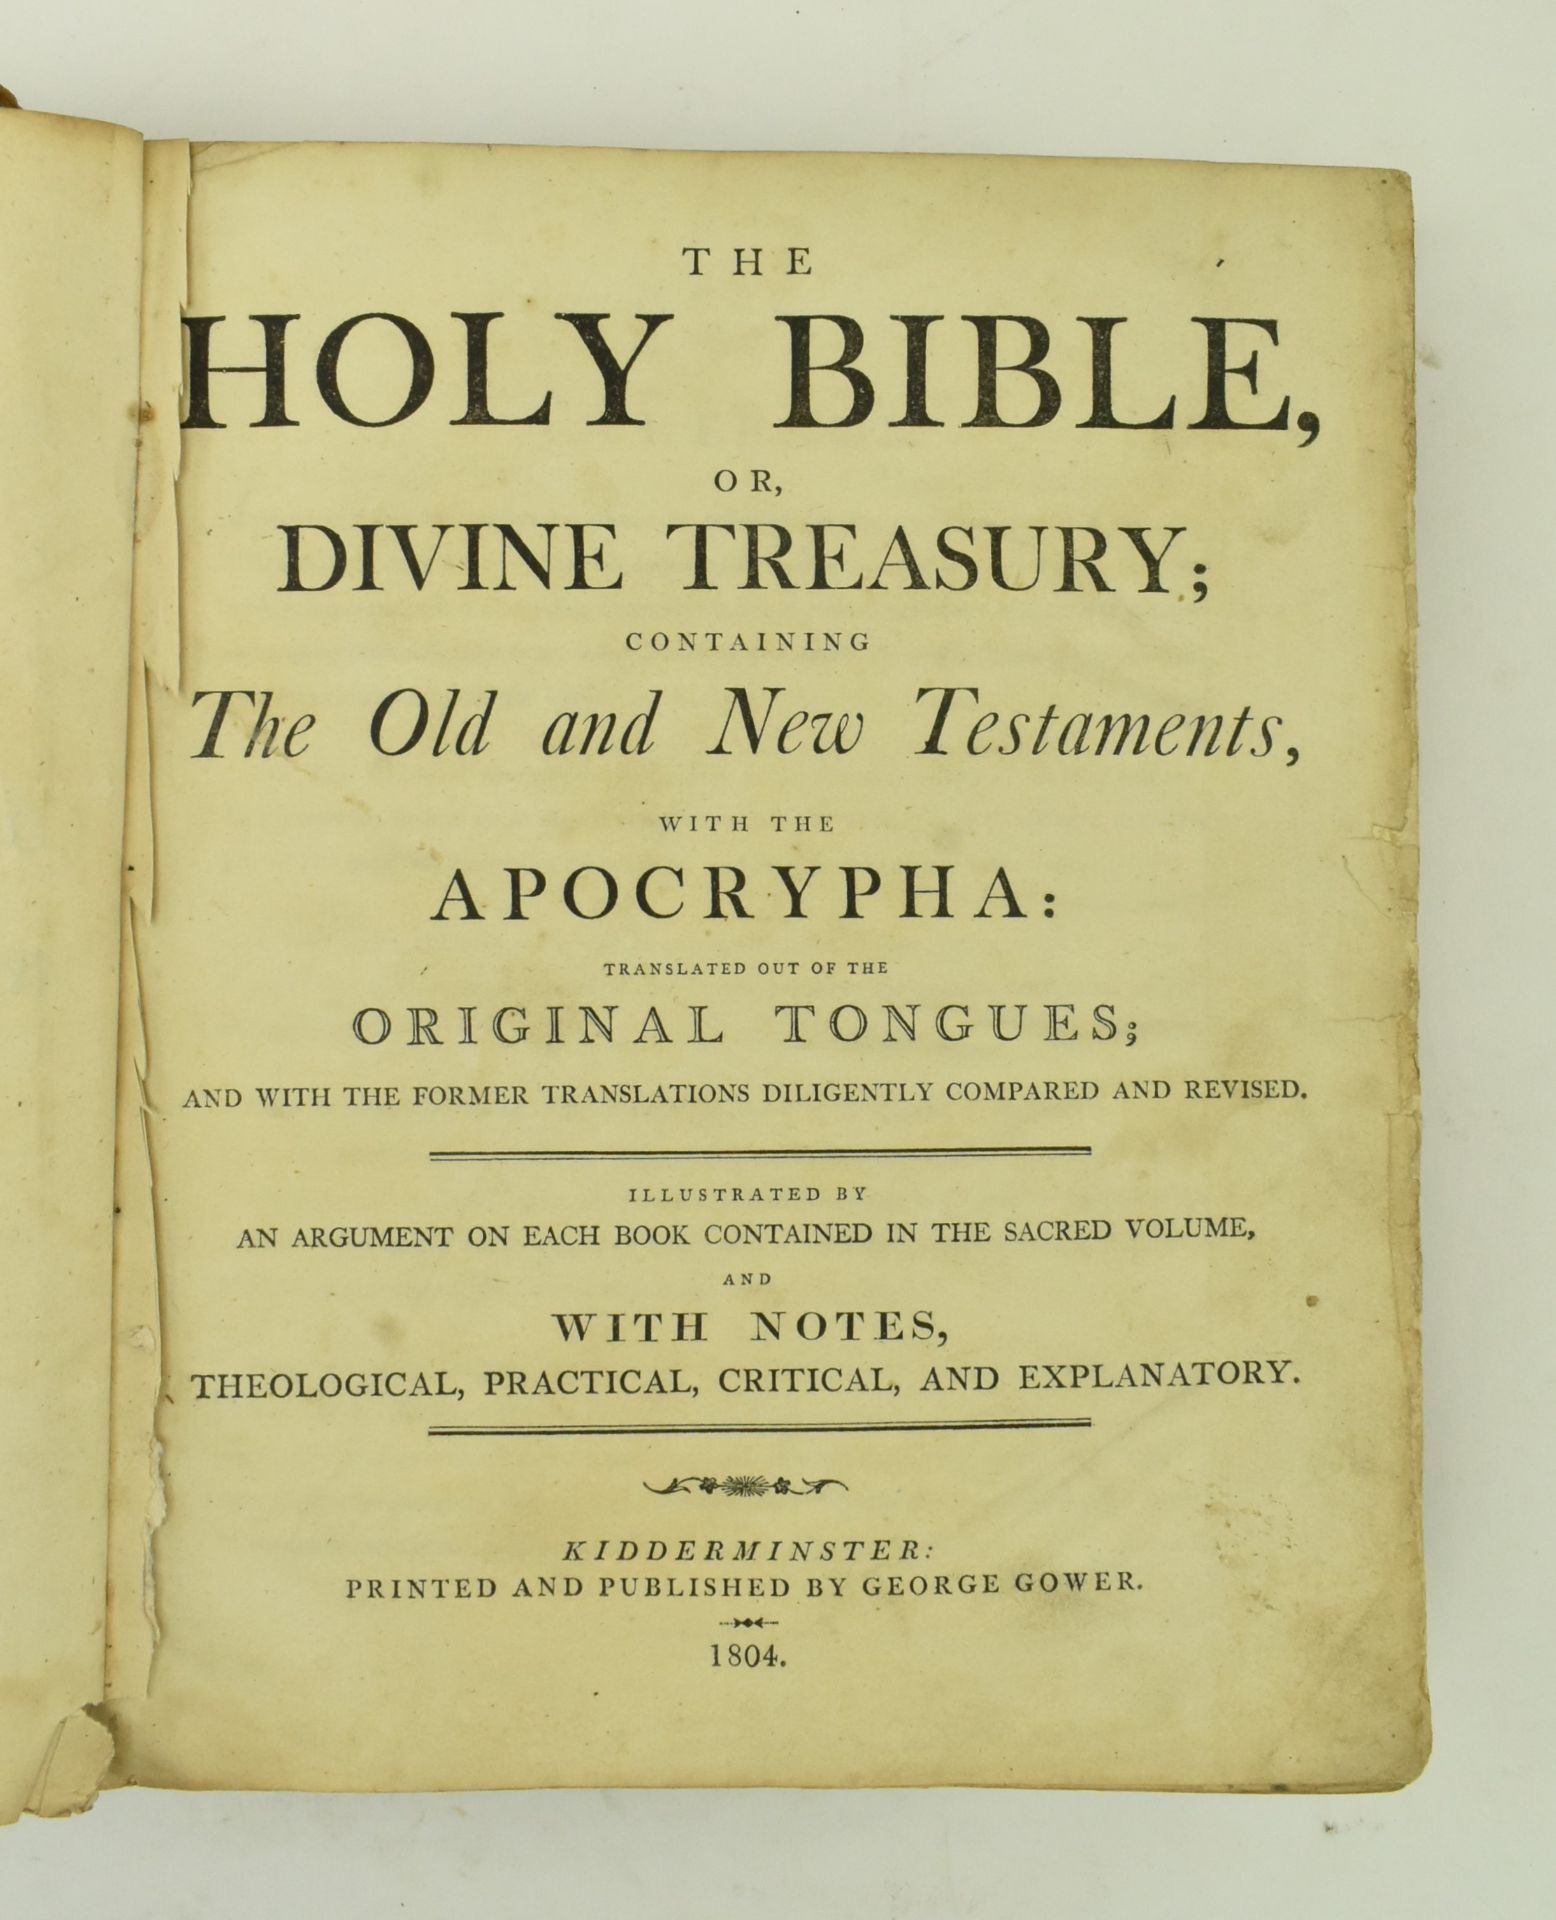 1804 THE HOLY BIBLE, OR, DIVINE TREASURY. PRINTED KIDDERMINSTER - Image 3 of 7